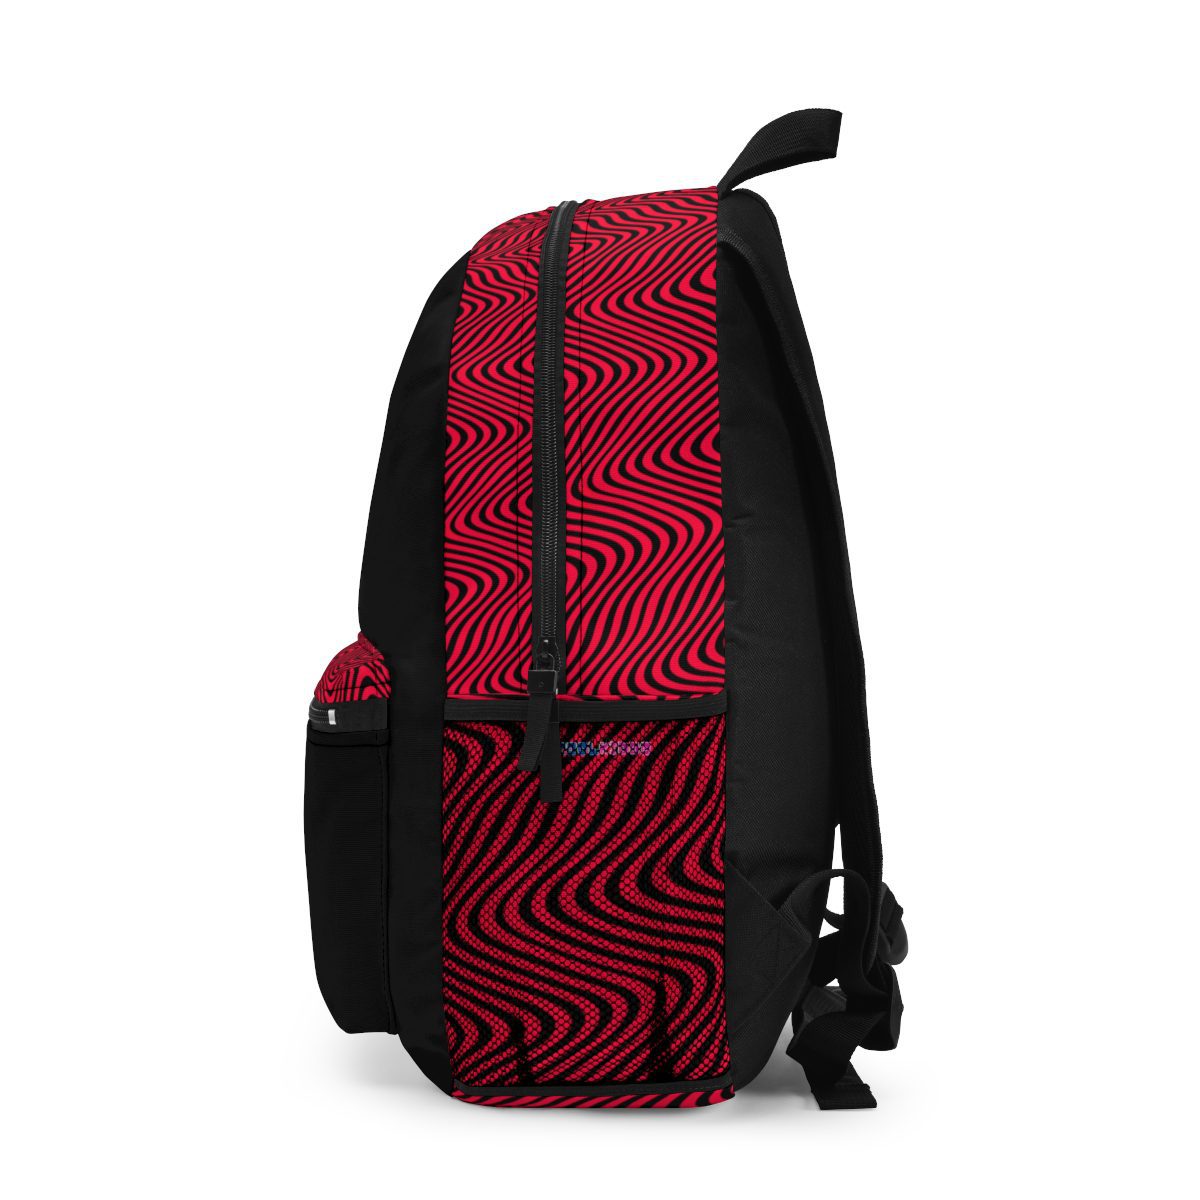 Minecraft Pewdiepie Logo and Symbol Black and Red Backpack Cool Kiddo 14